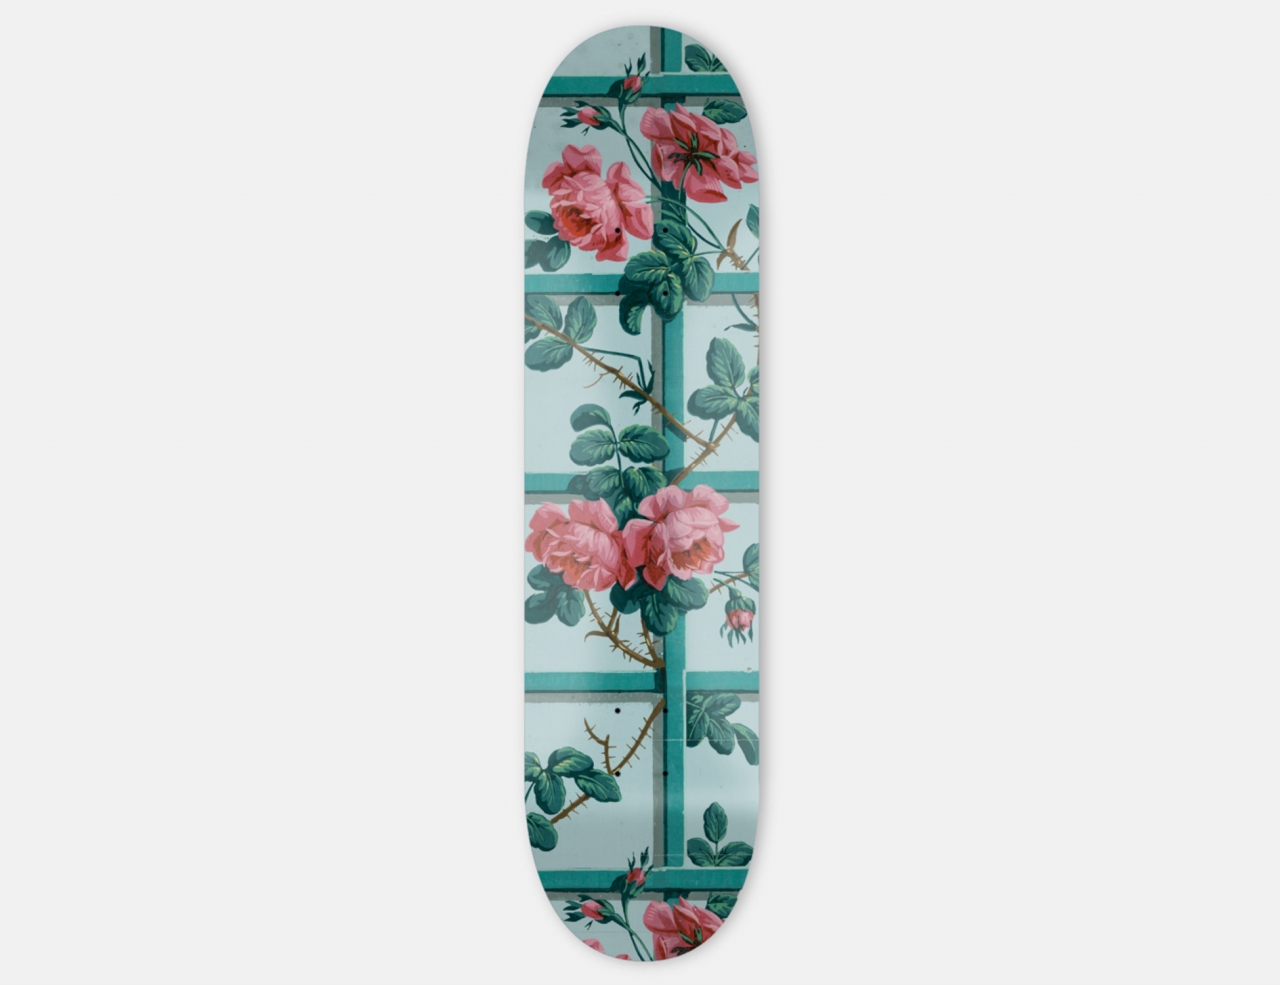 The Loose Company Roses 8.0 Deck